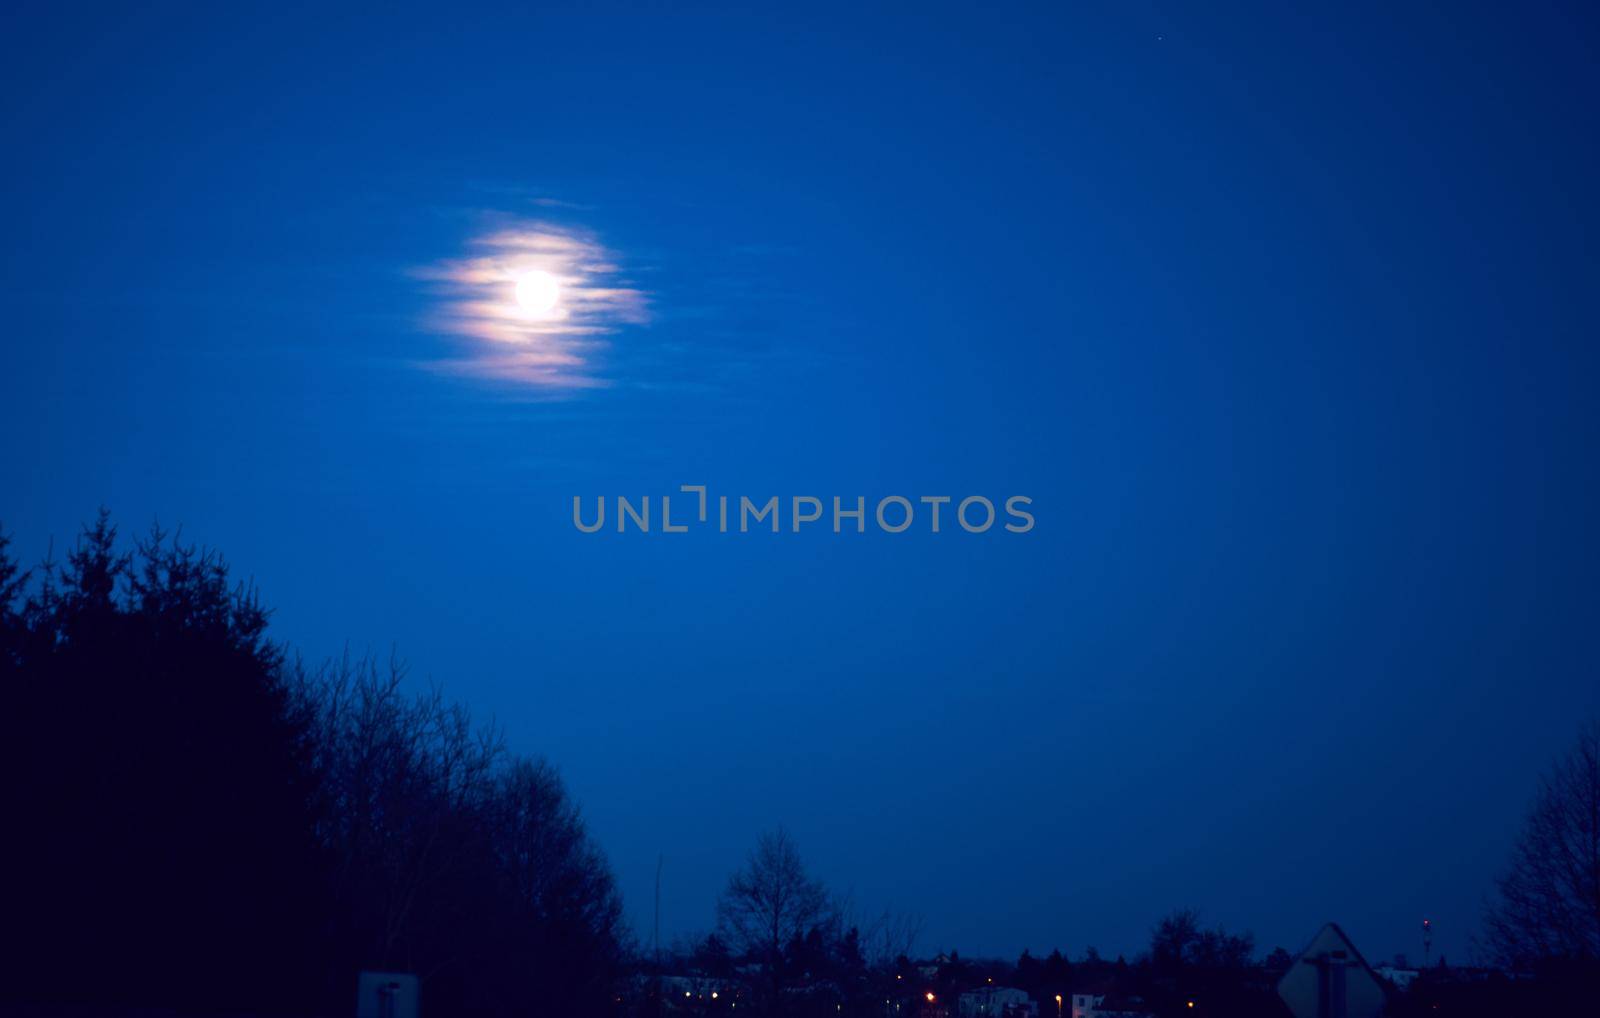 moon on night sky, blue hour by Jindrich_Blecha